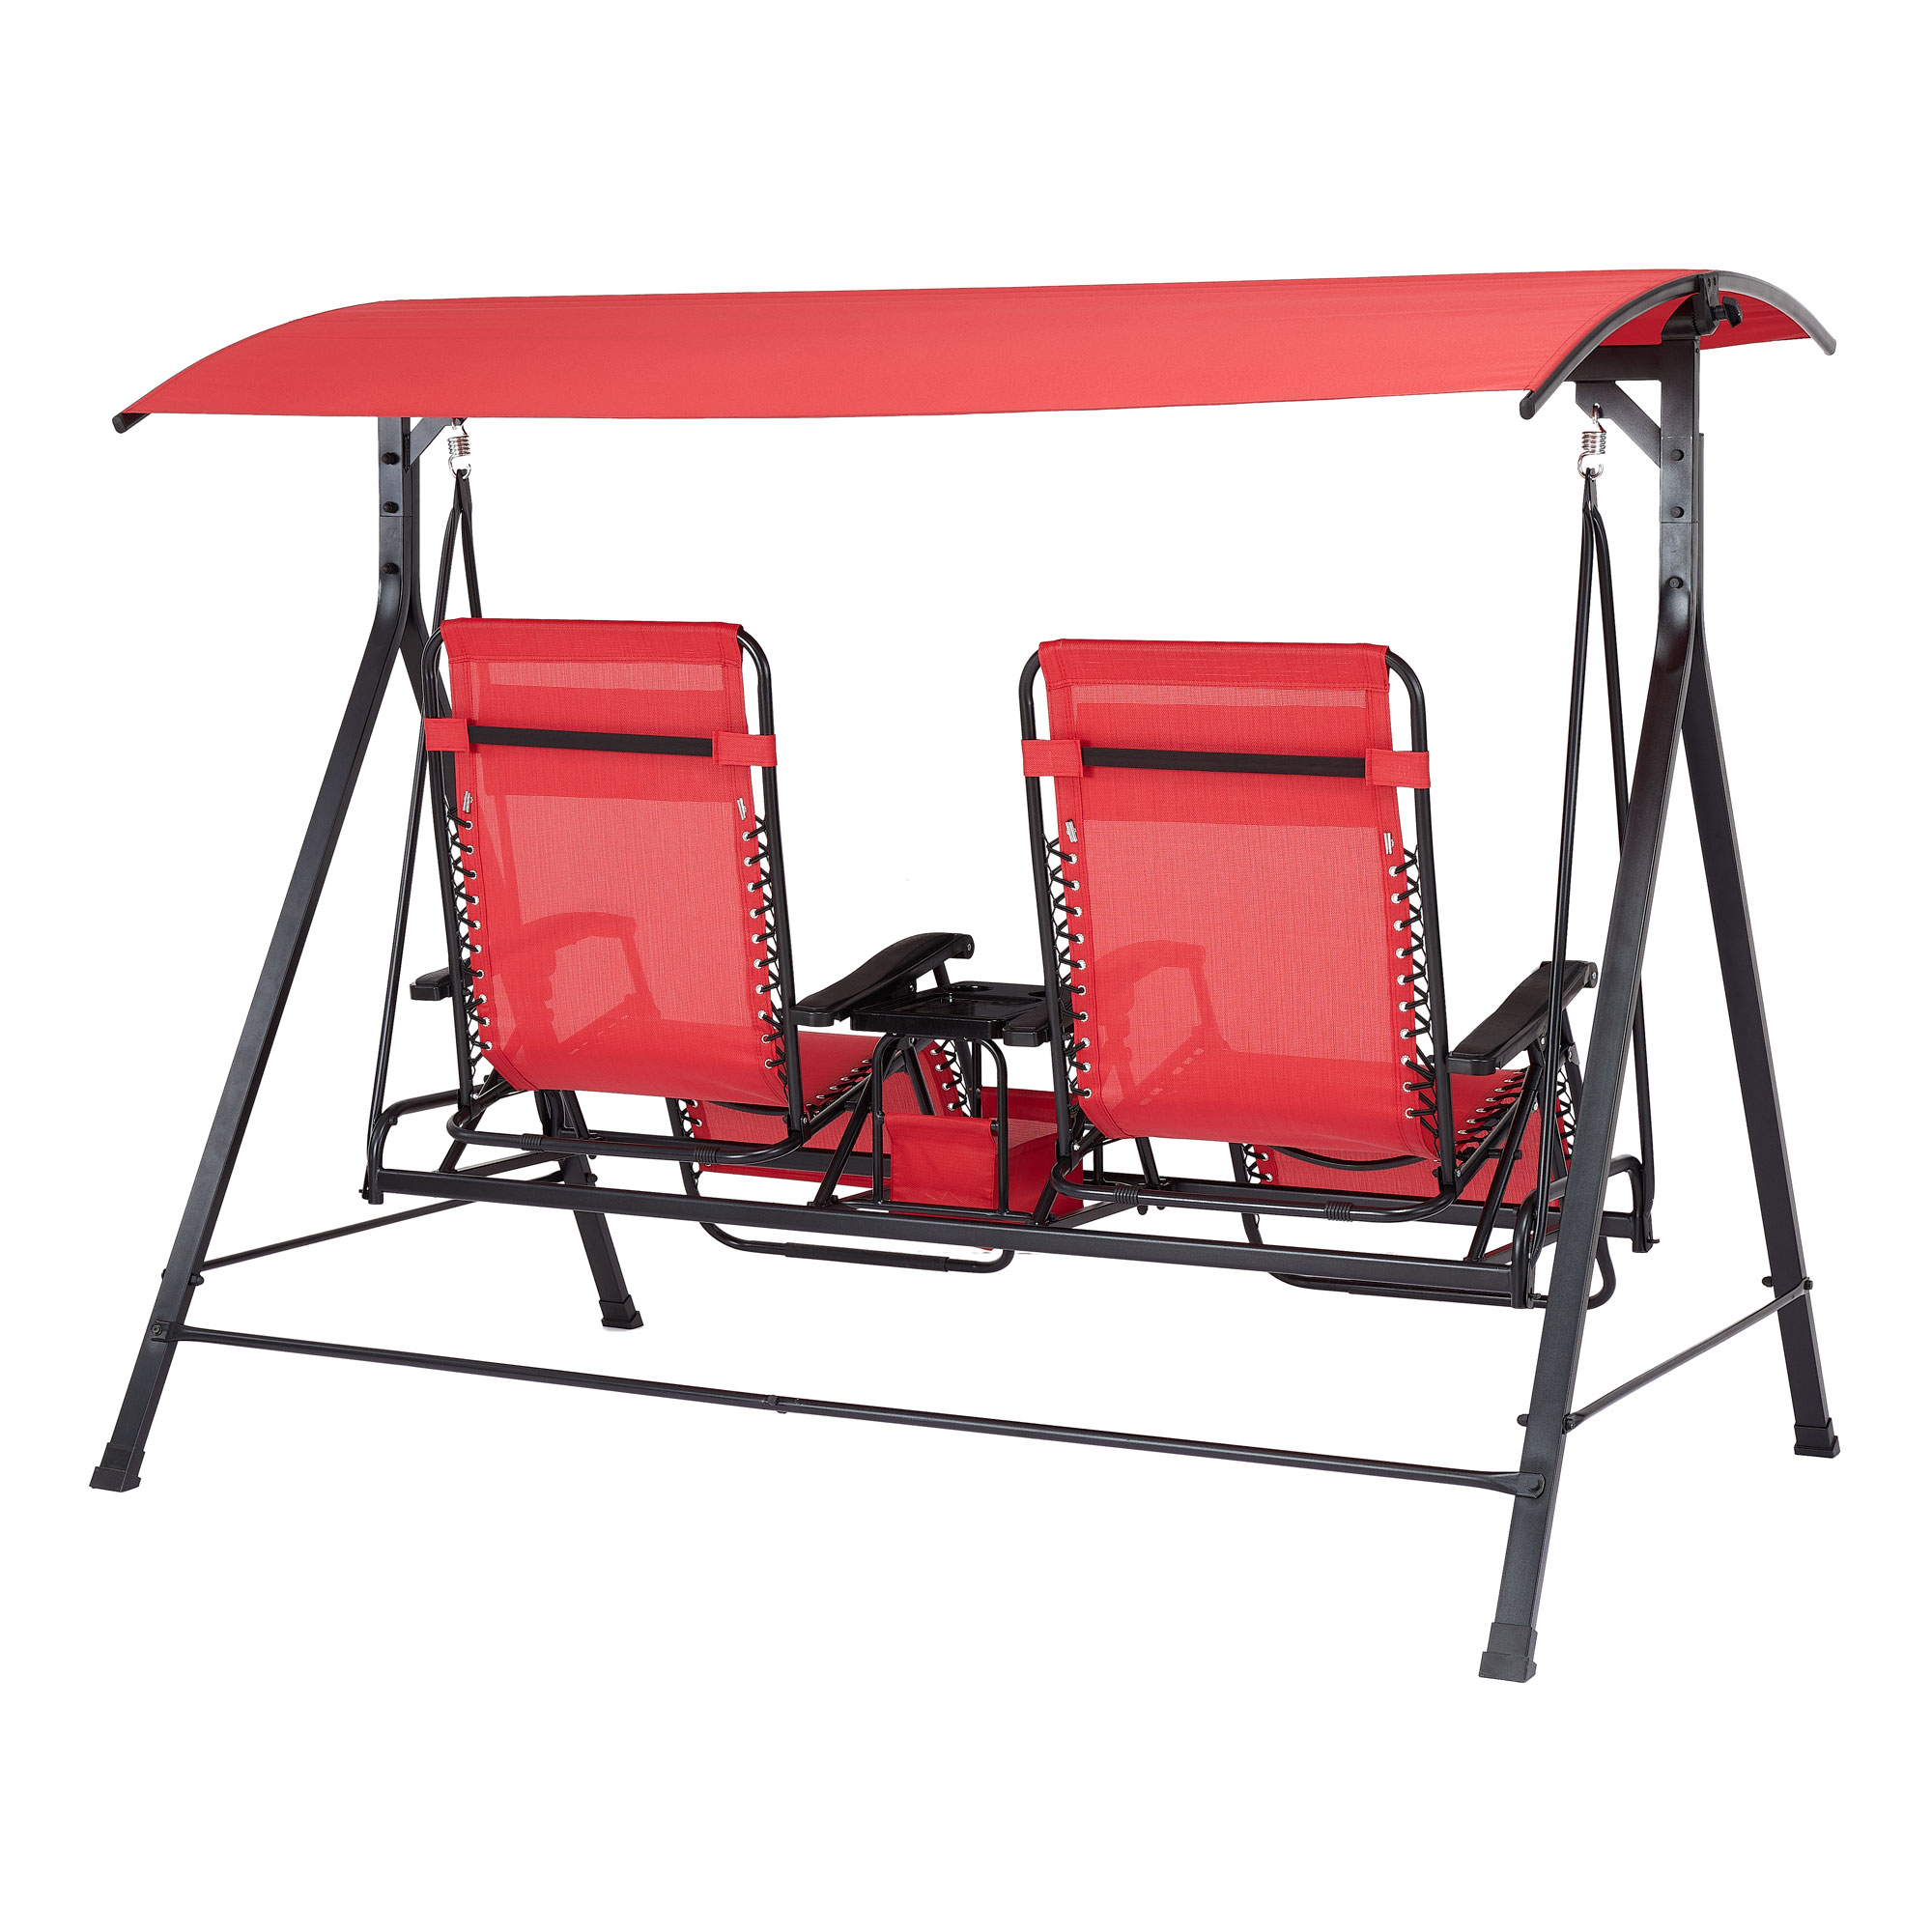 Mainstays 2-Seat Reclining Oversized Zero-Gravity Swing with Canopy and Center Storage Console, Red/Black - image 3 of 9